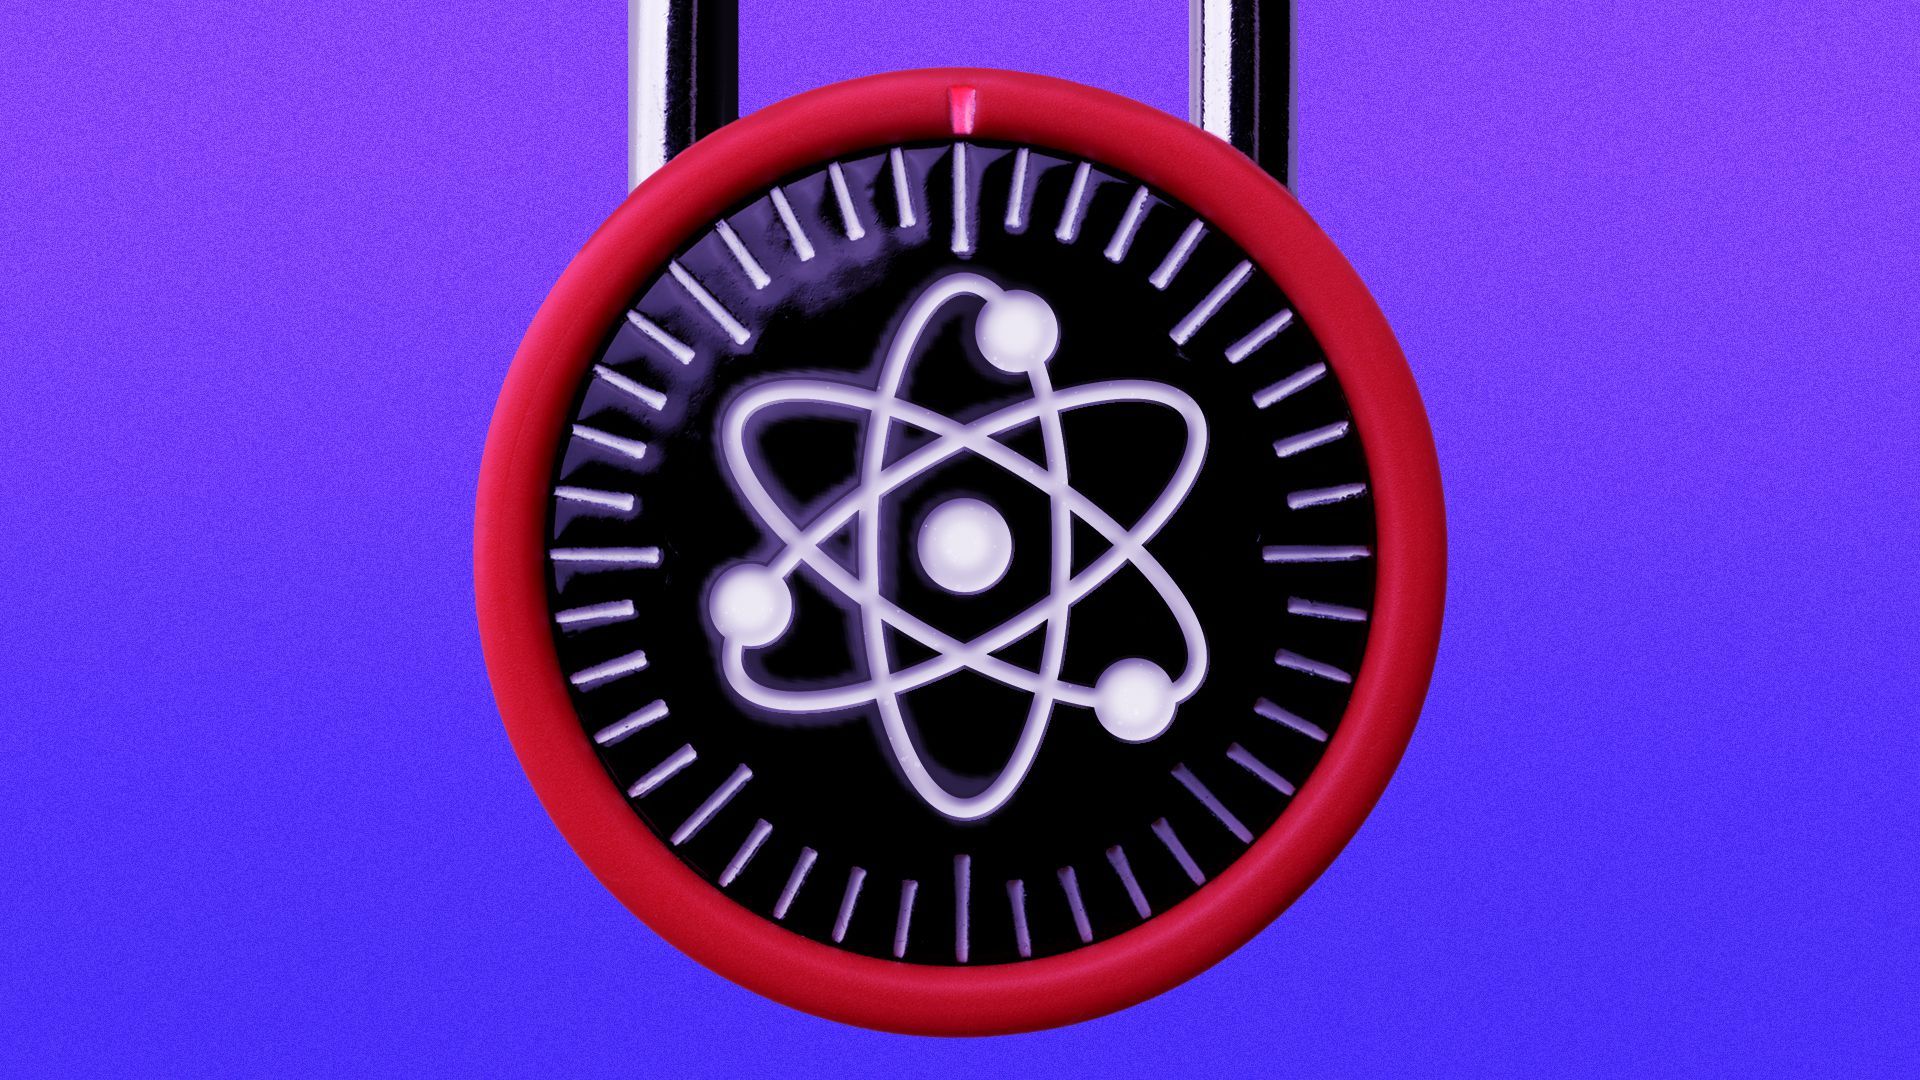 Illustration of a padlock with an atom on it